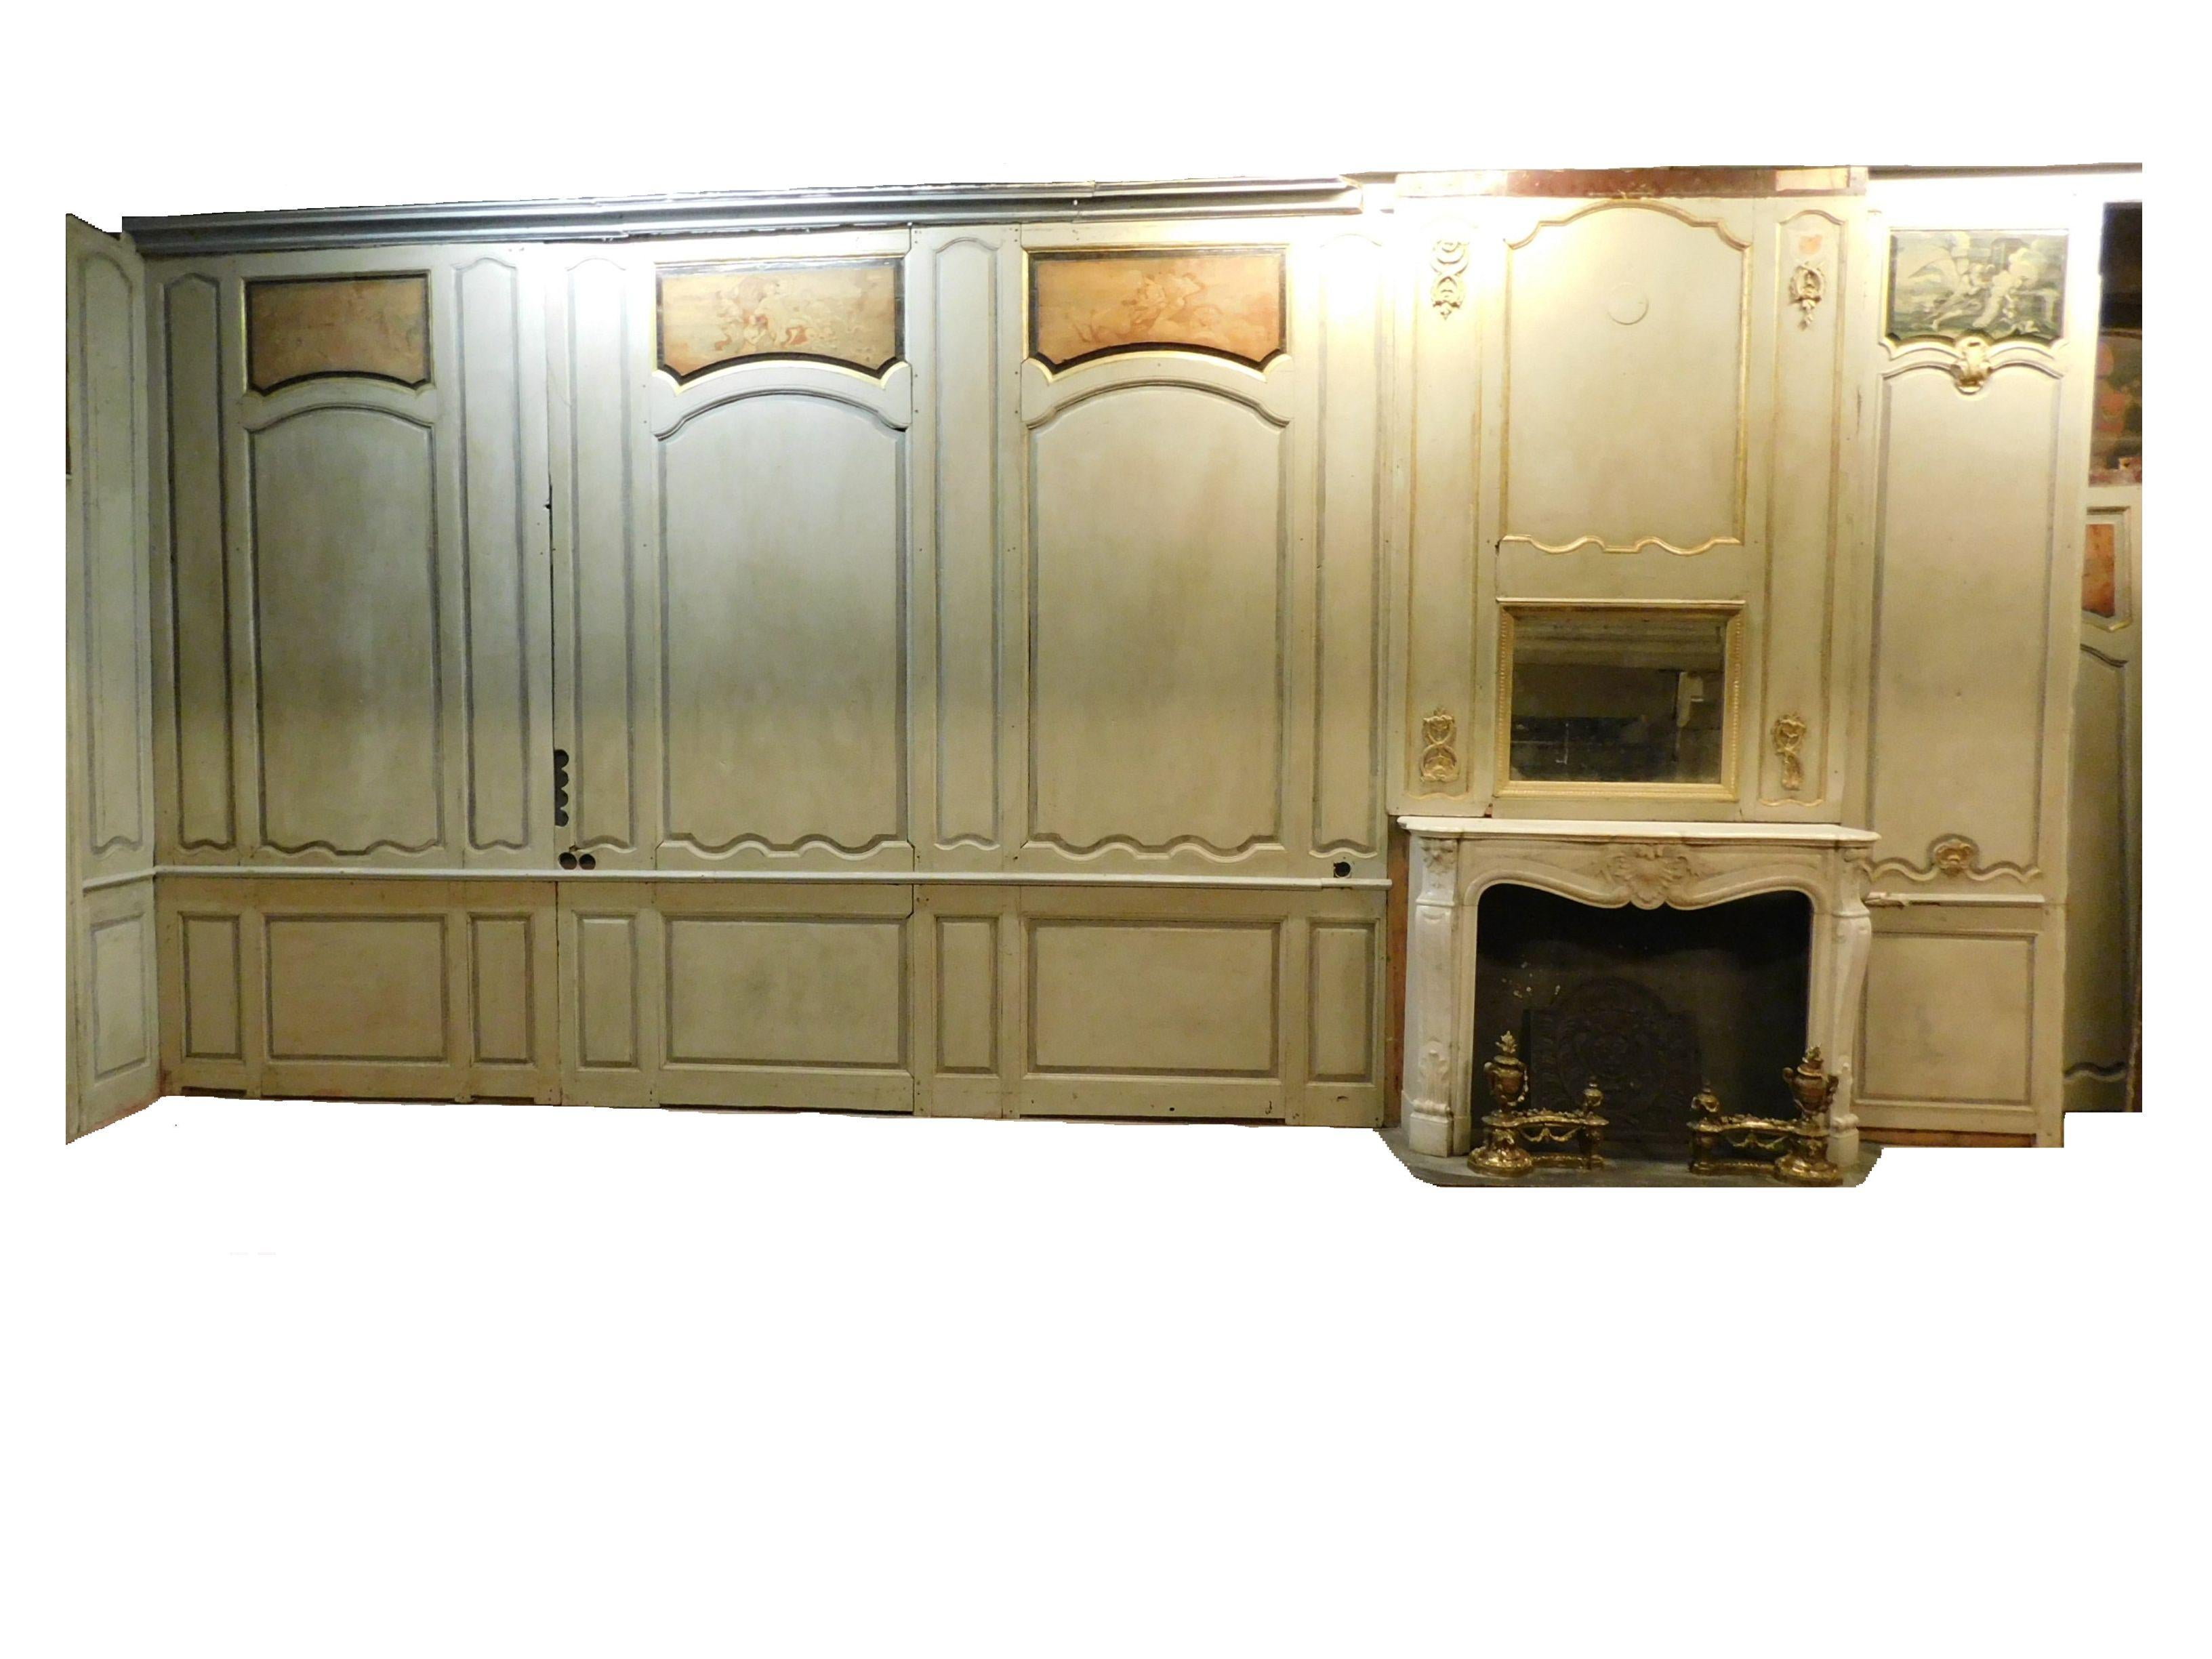 Antique Boiserie in Gray-Green Lacquered Wood, Gilded Friezes, 1700 Paris